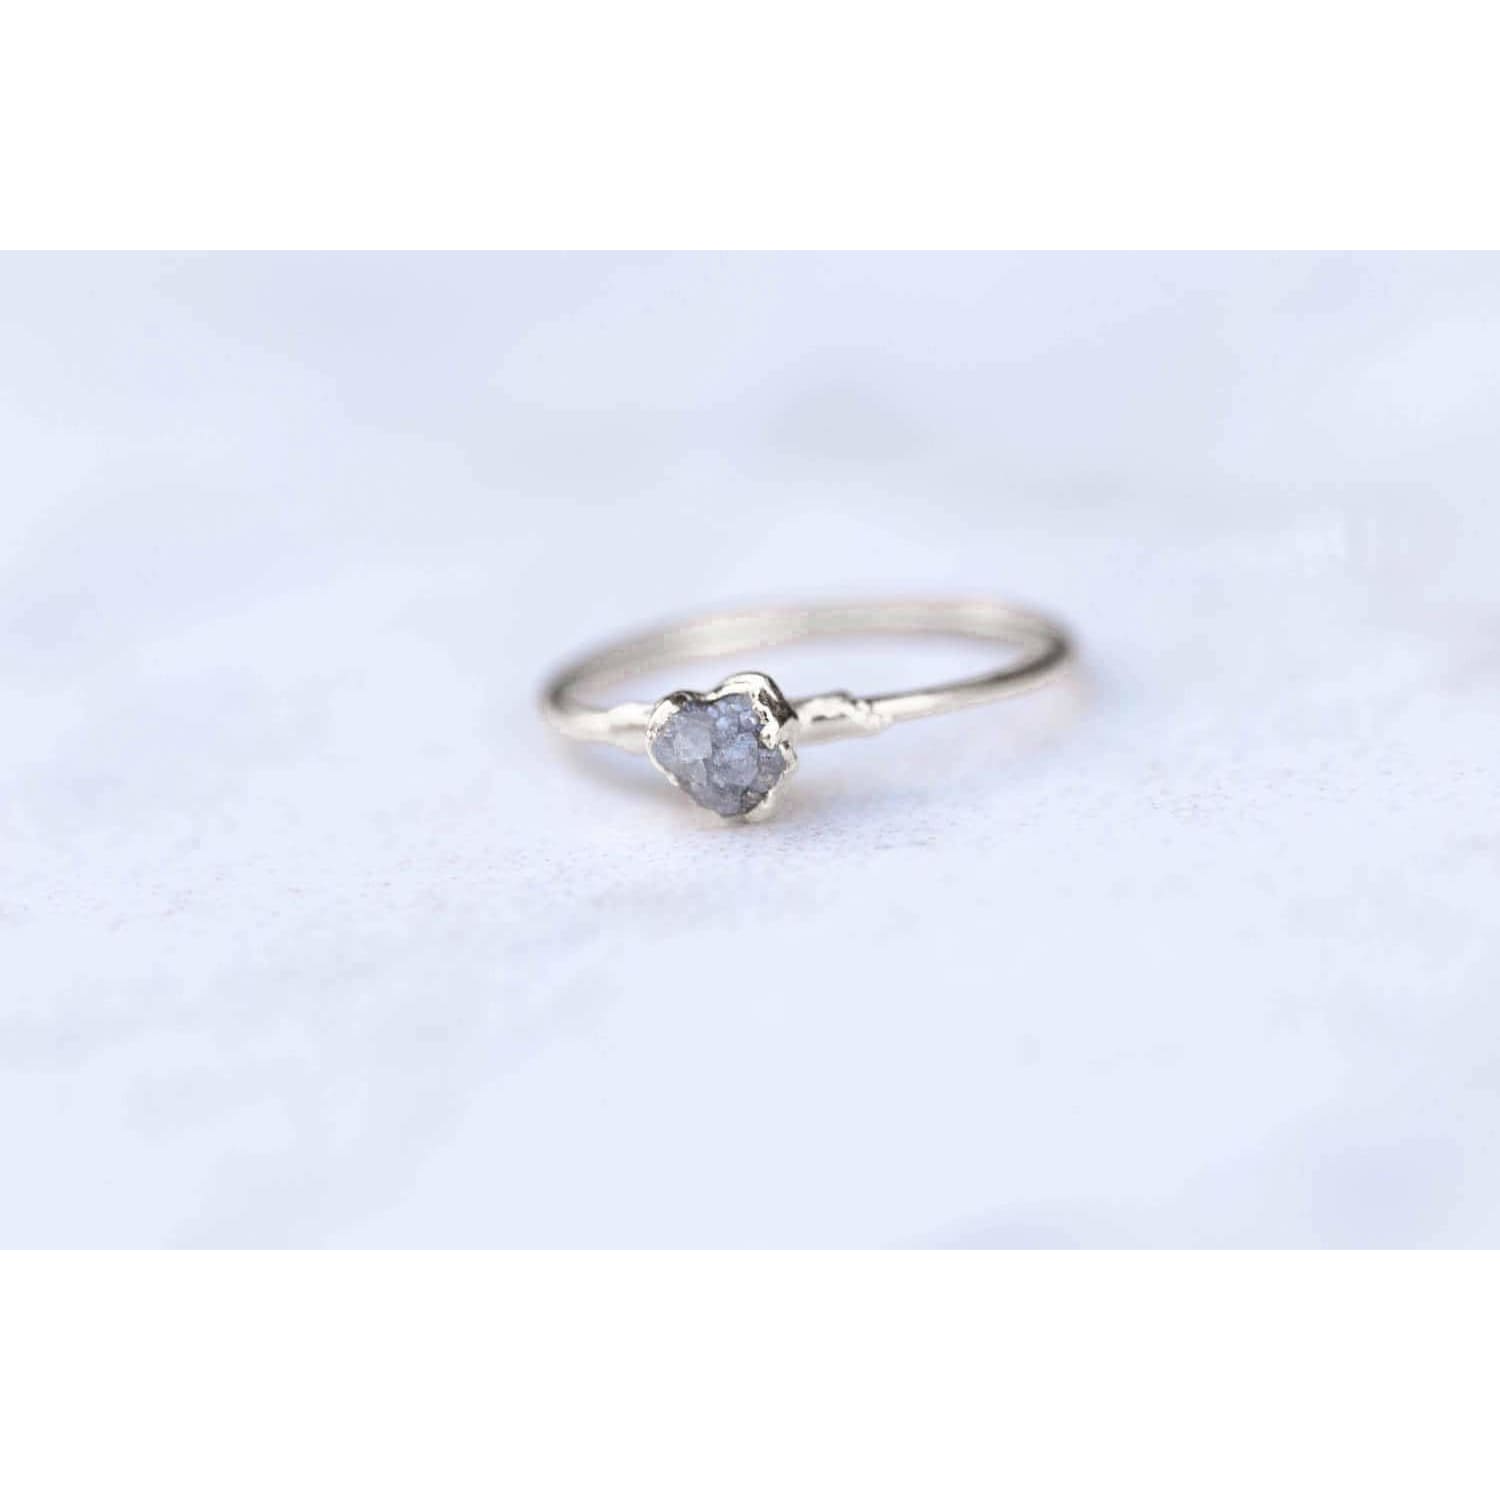 Raw Diamond Ring in Sterling Silver Gemstone Jewelry Rough